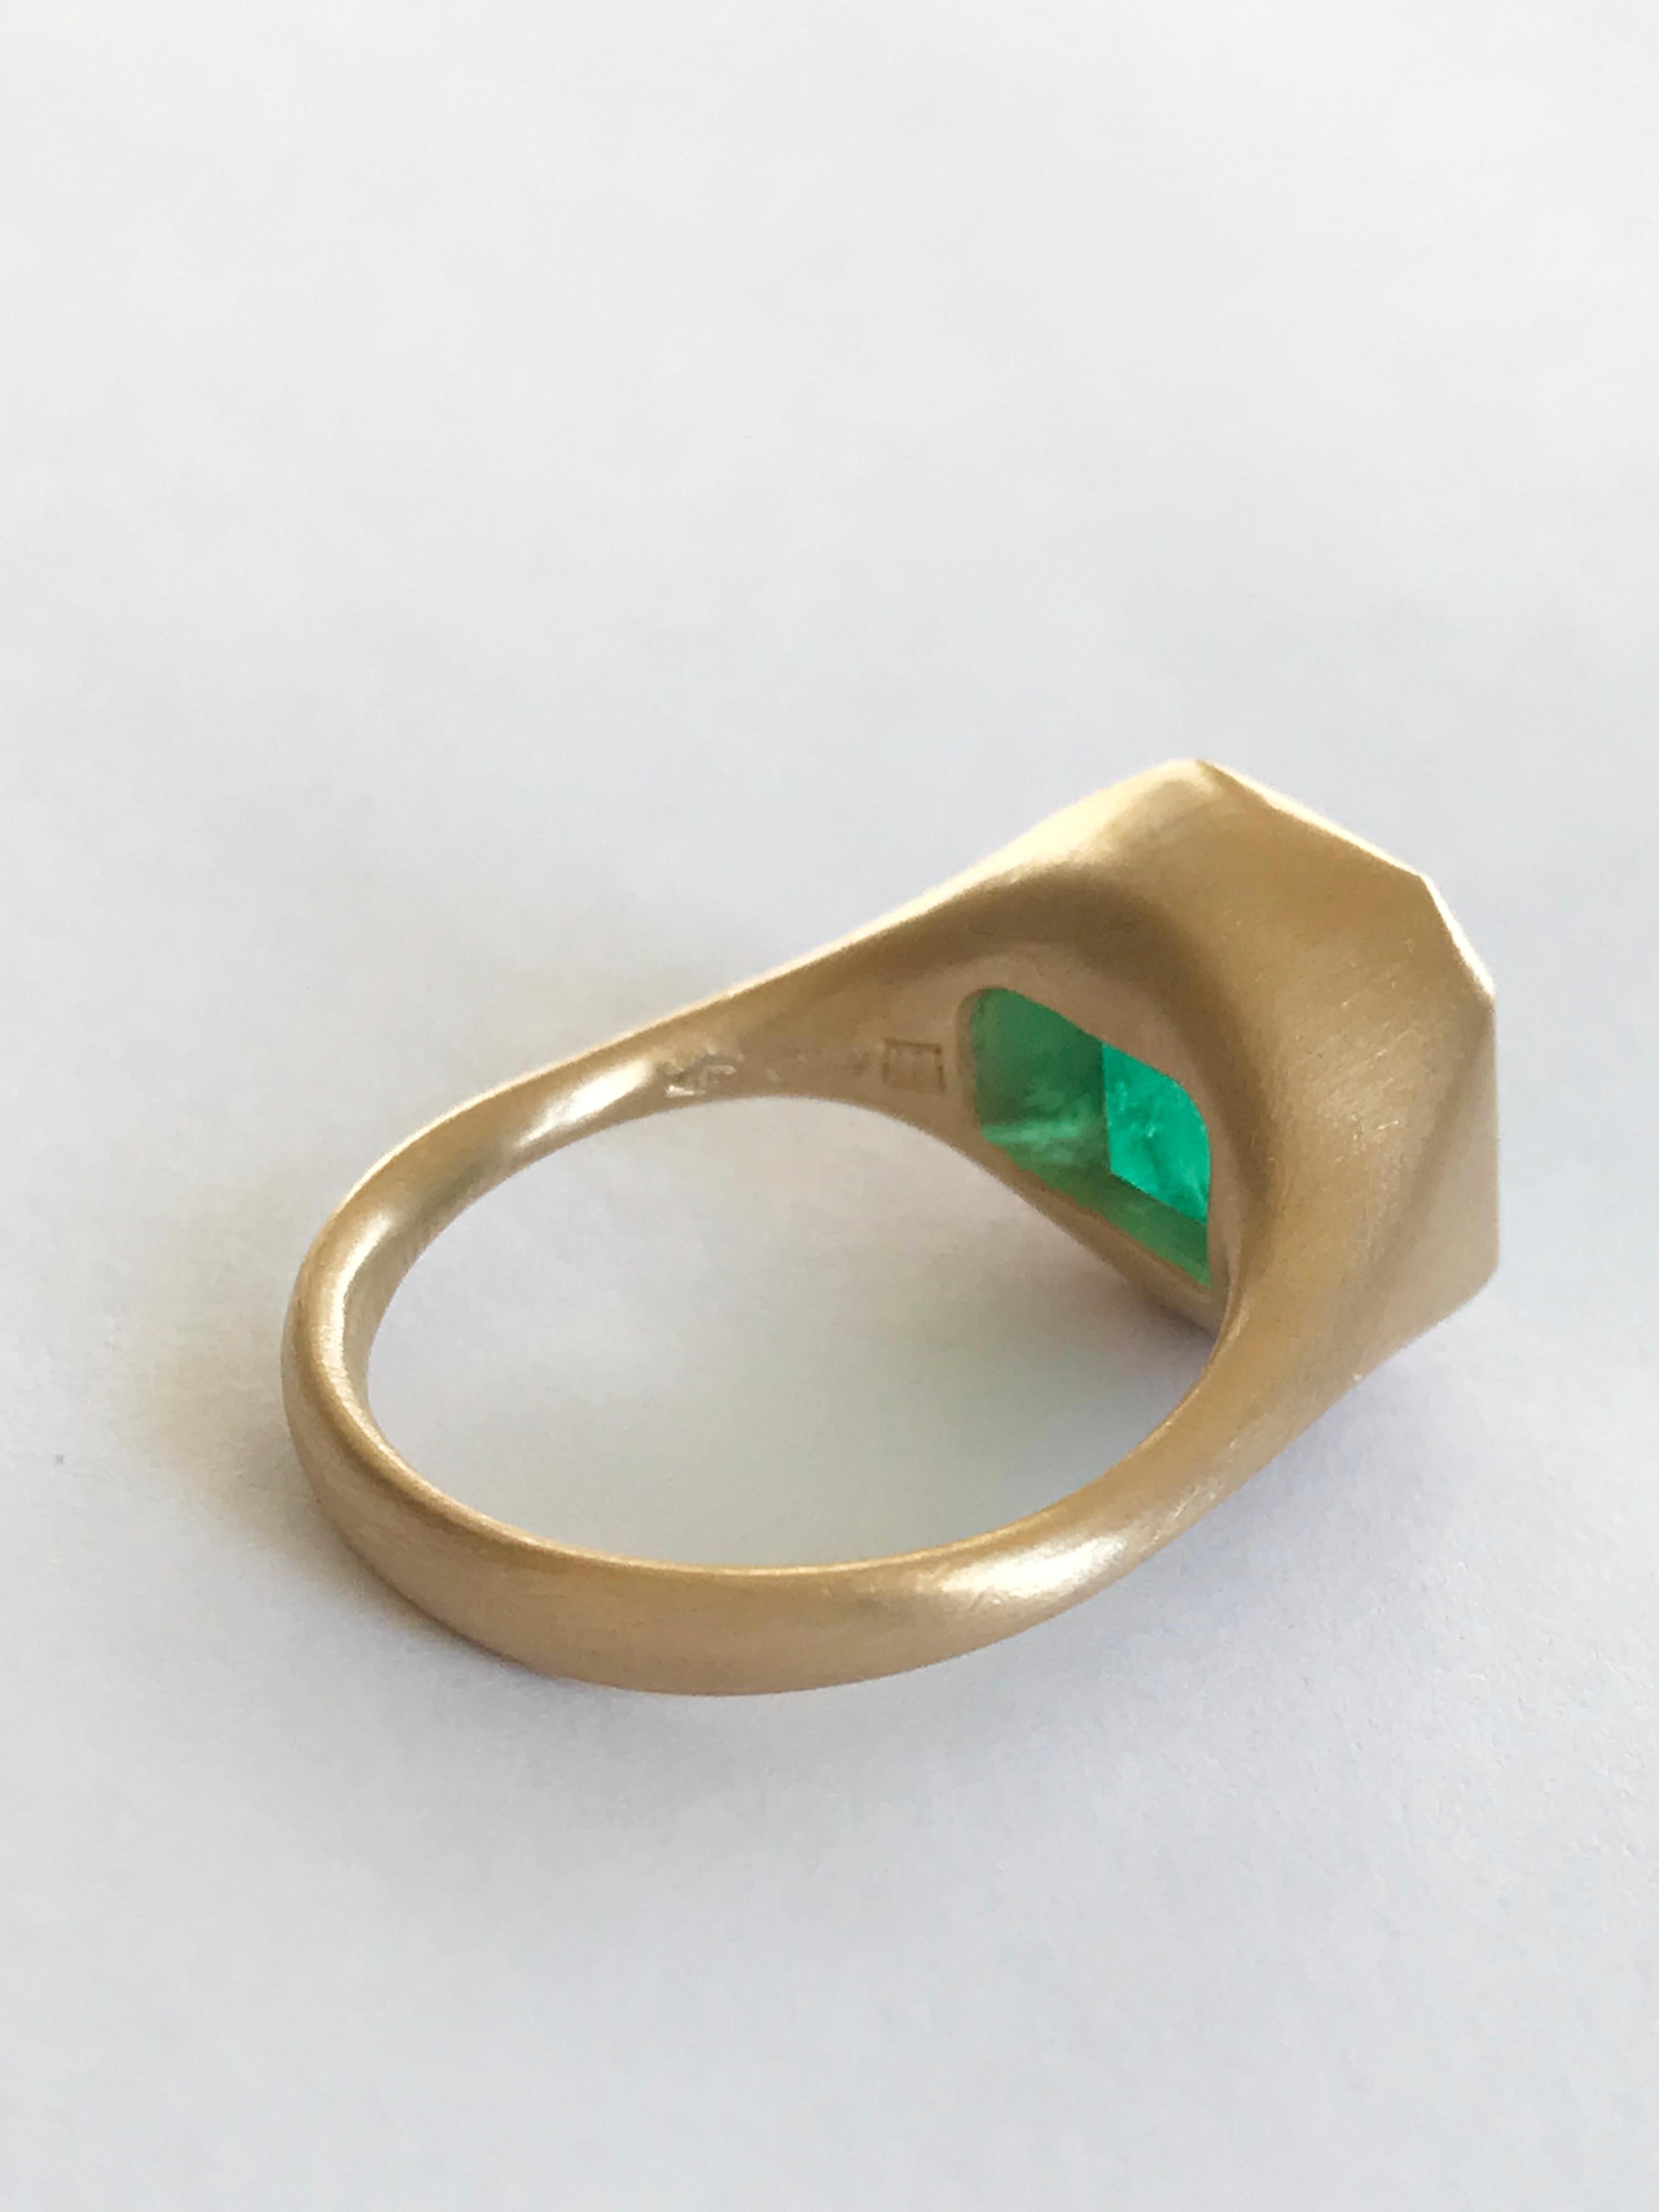 Dalben 4, 12 Carat Colombian Emerald Yellow Gold Ring For Sale 4